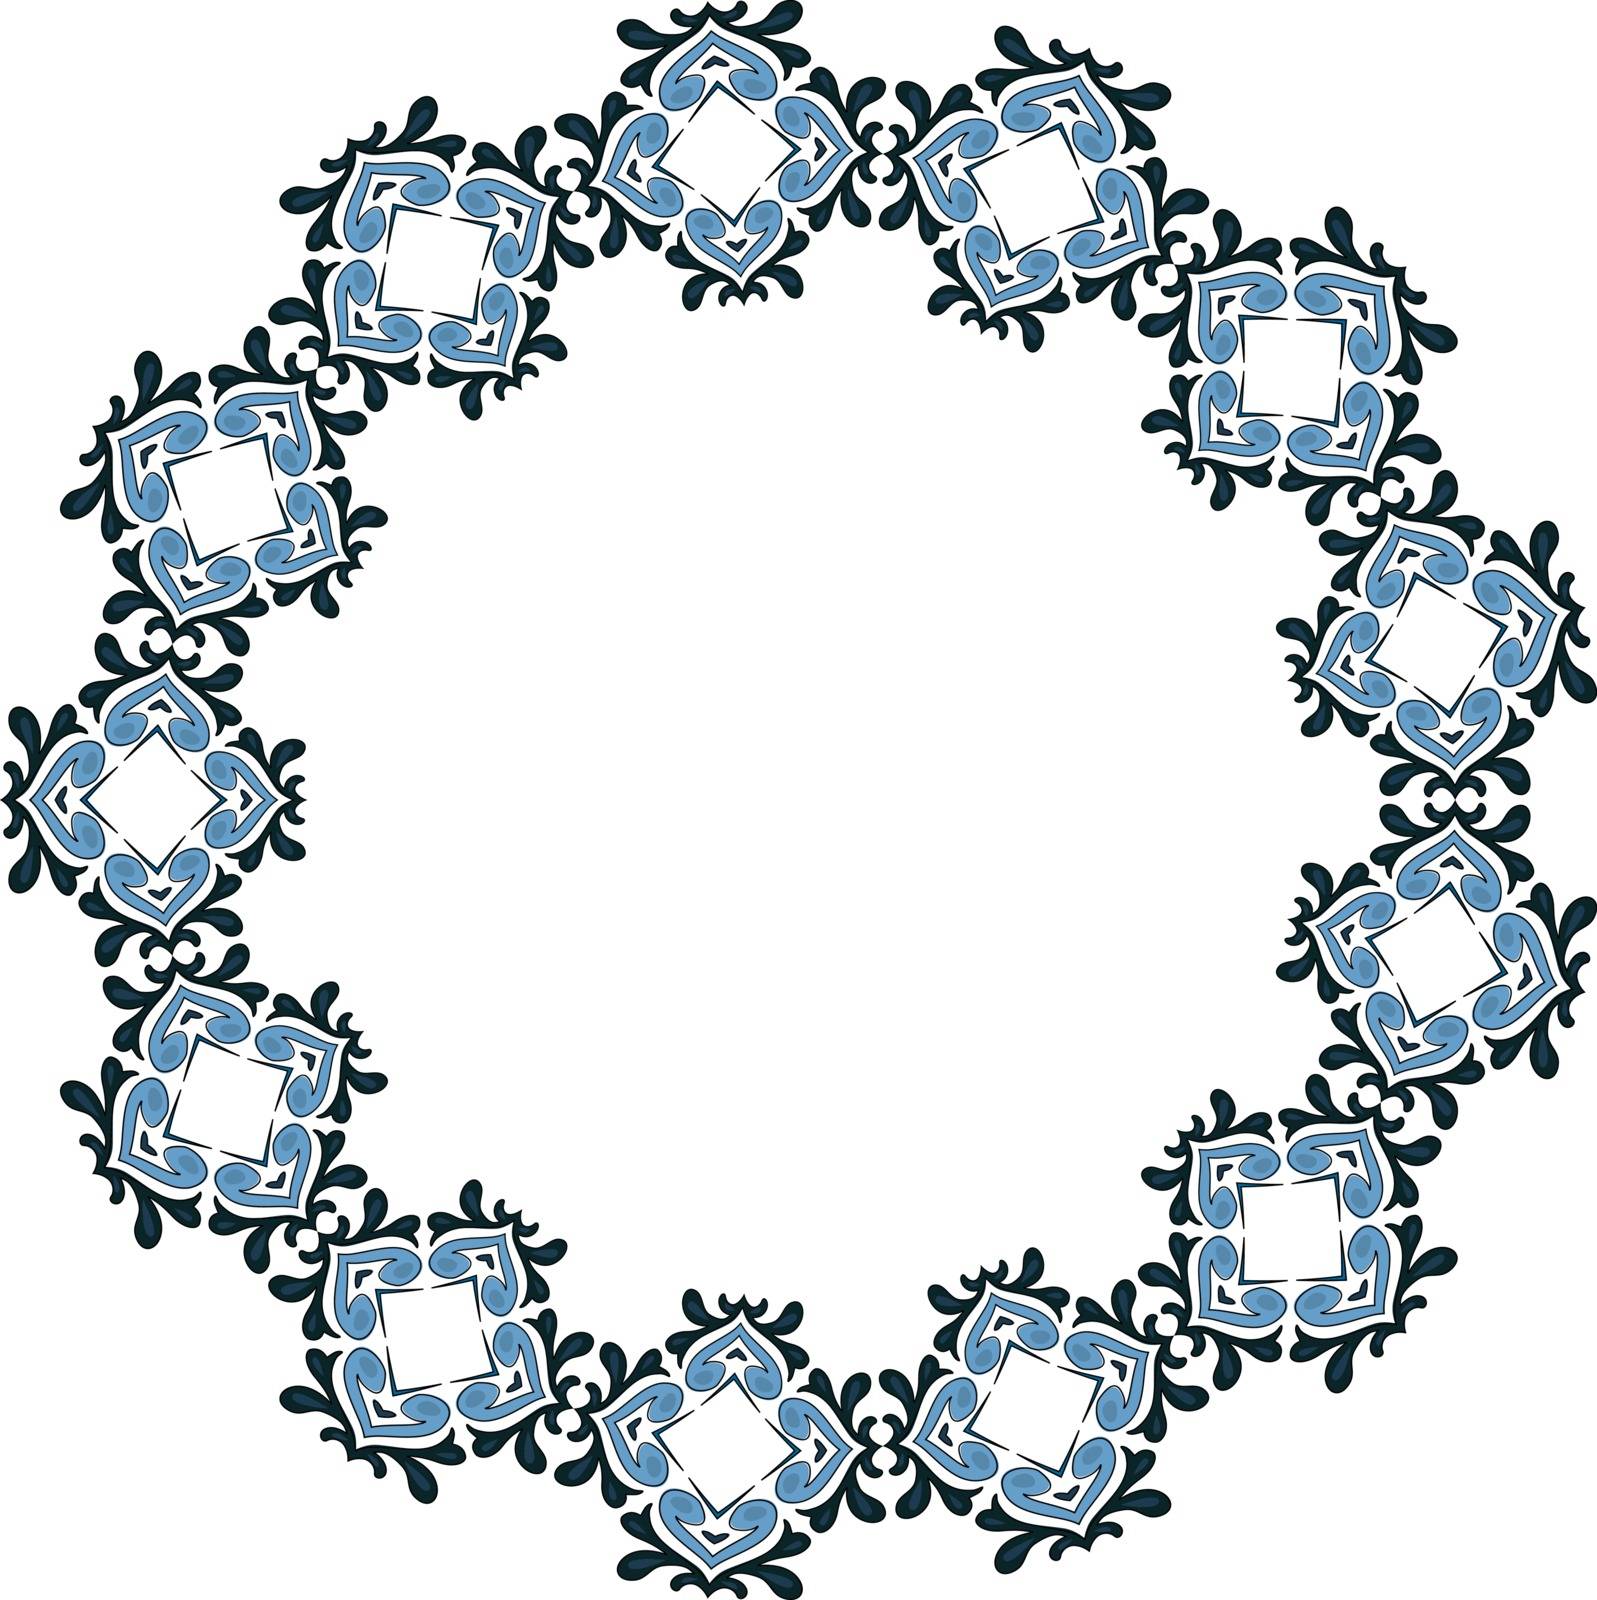 Decorative illustrated circle frame made of blue elements